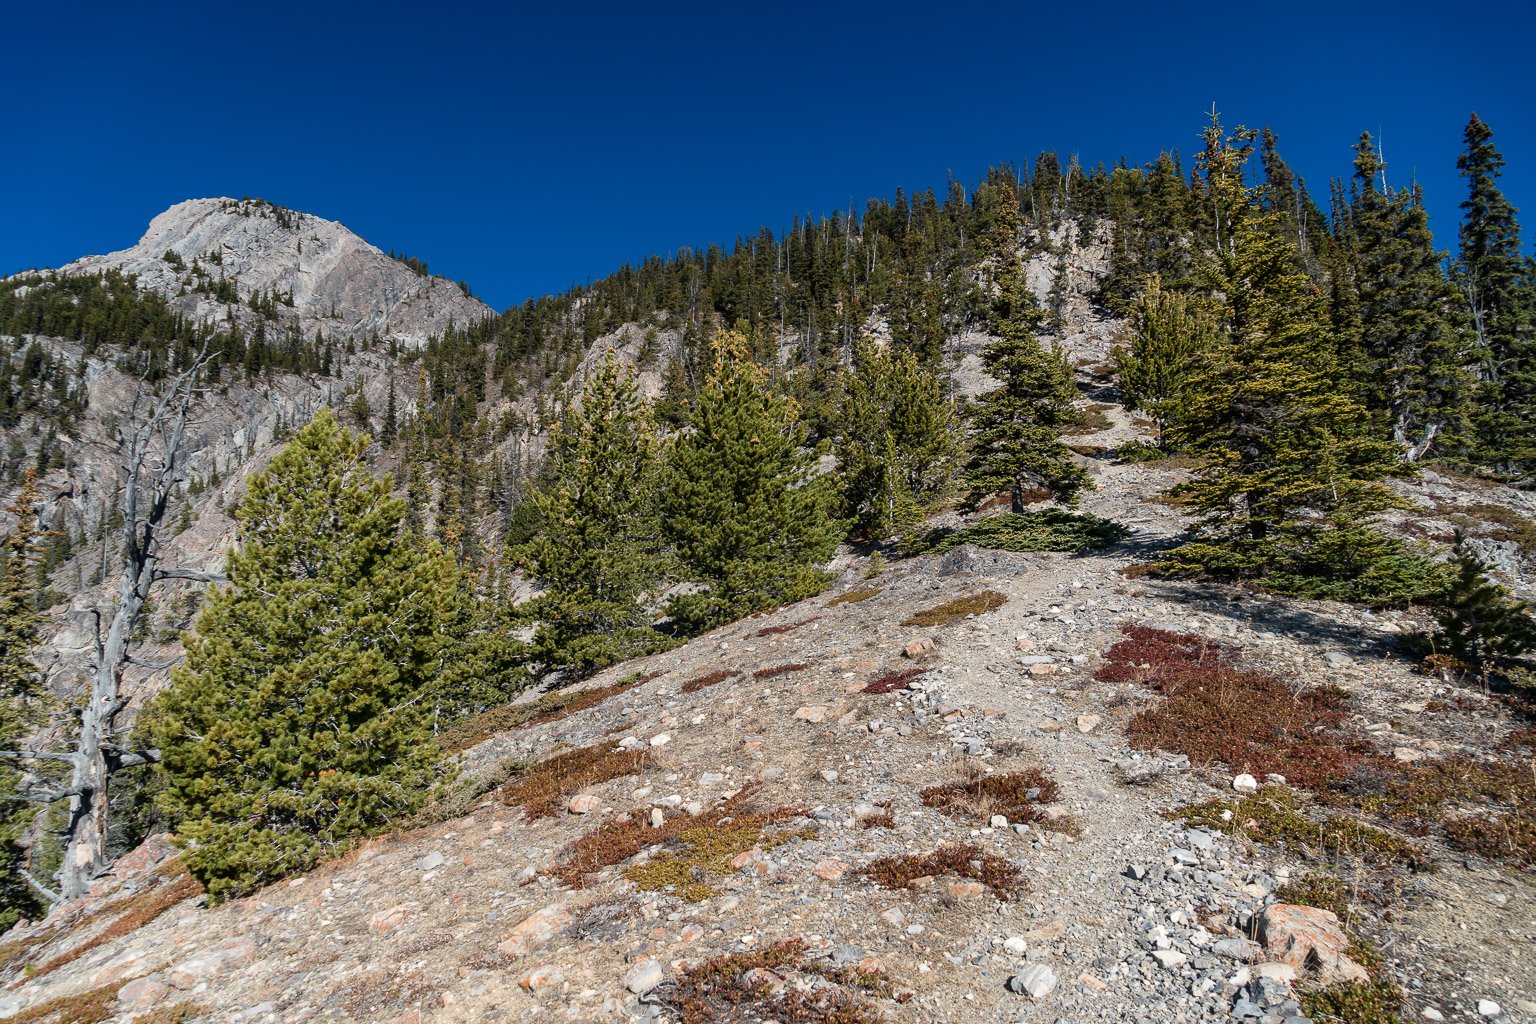 Hiking up the steep, hot south ridge of Mount Cory.